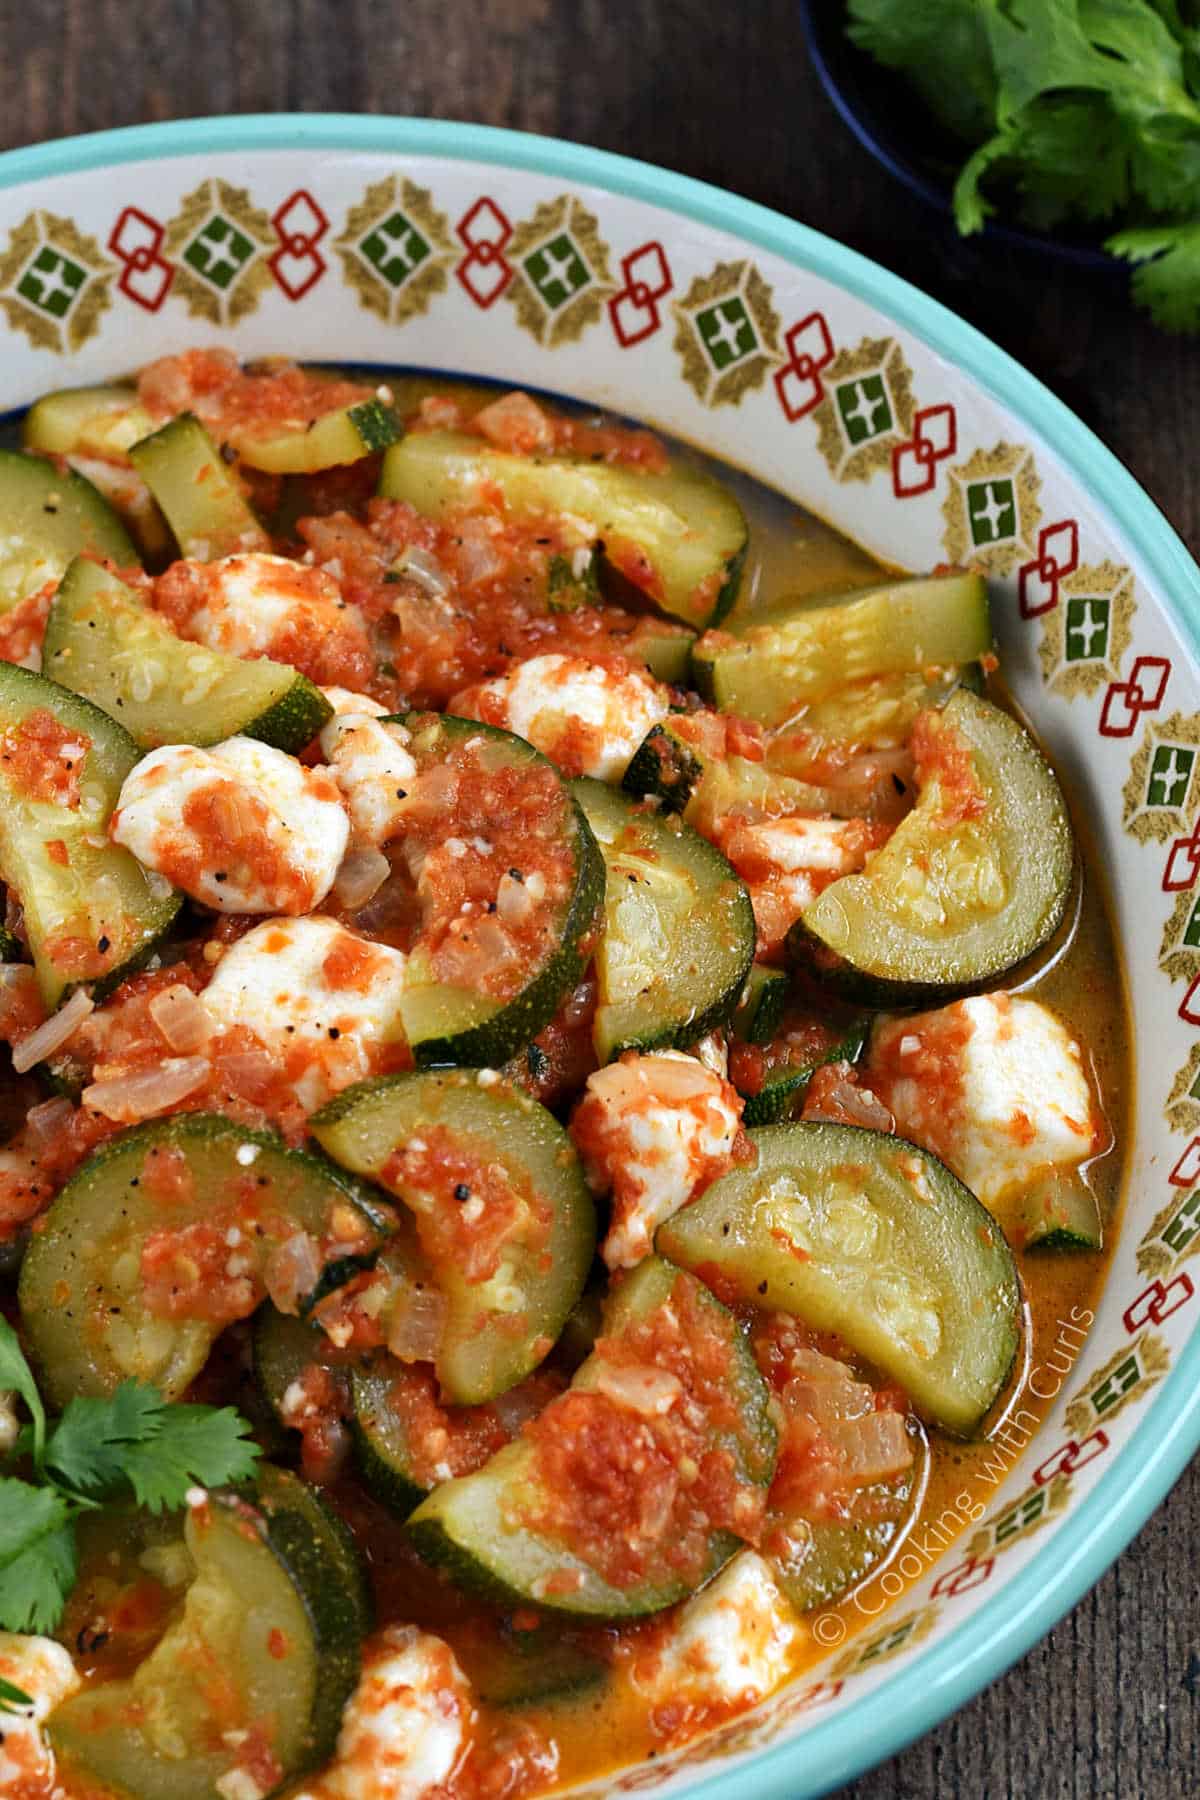 Cooked zucchini slices, melted cheese cubes, and tomato sauce in a bowl.